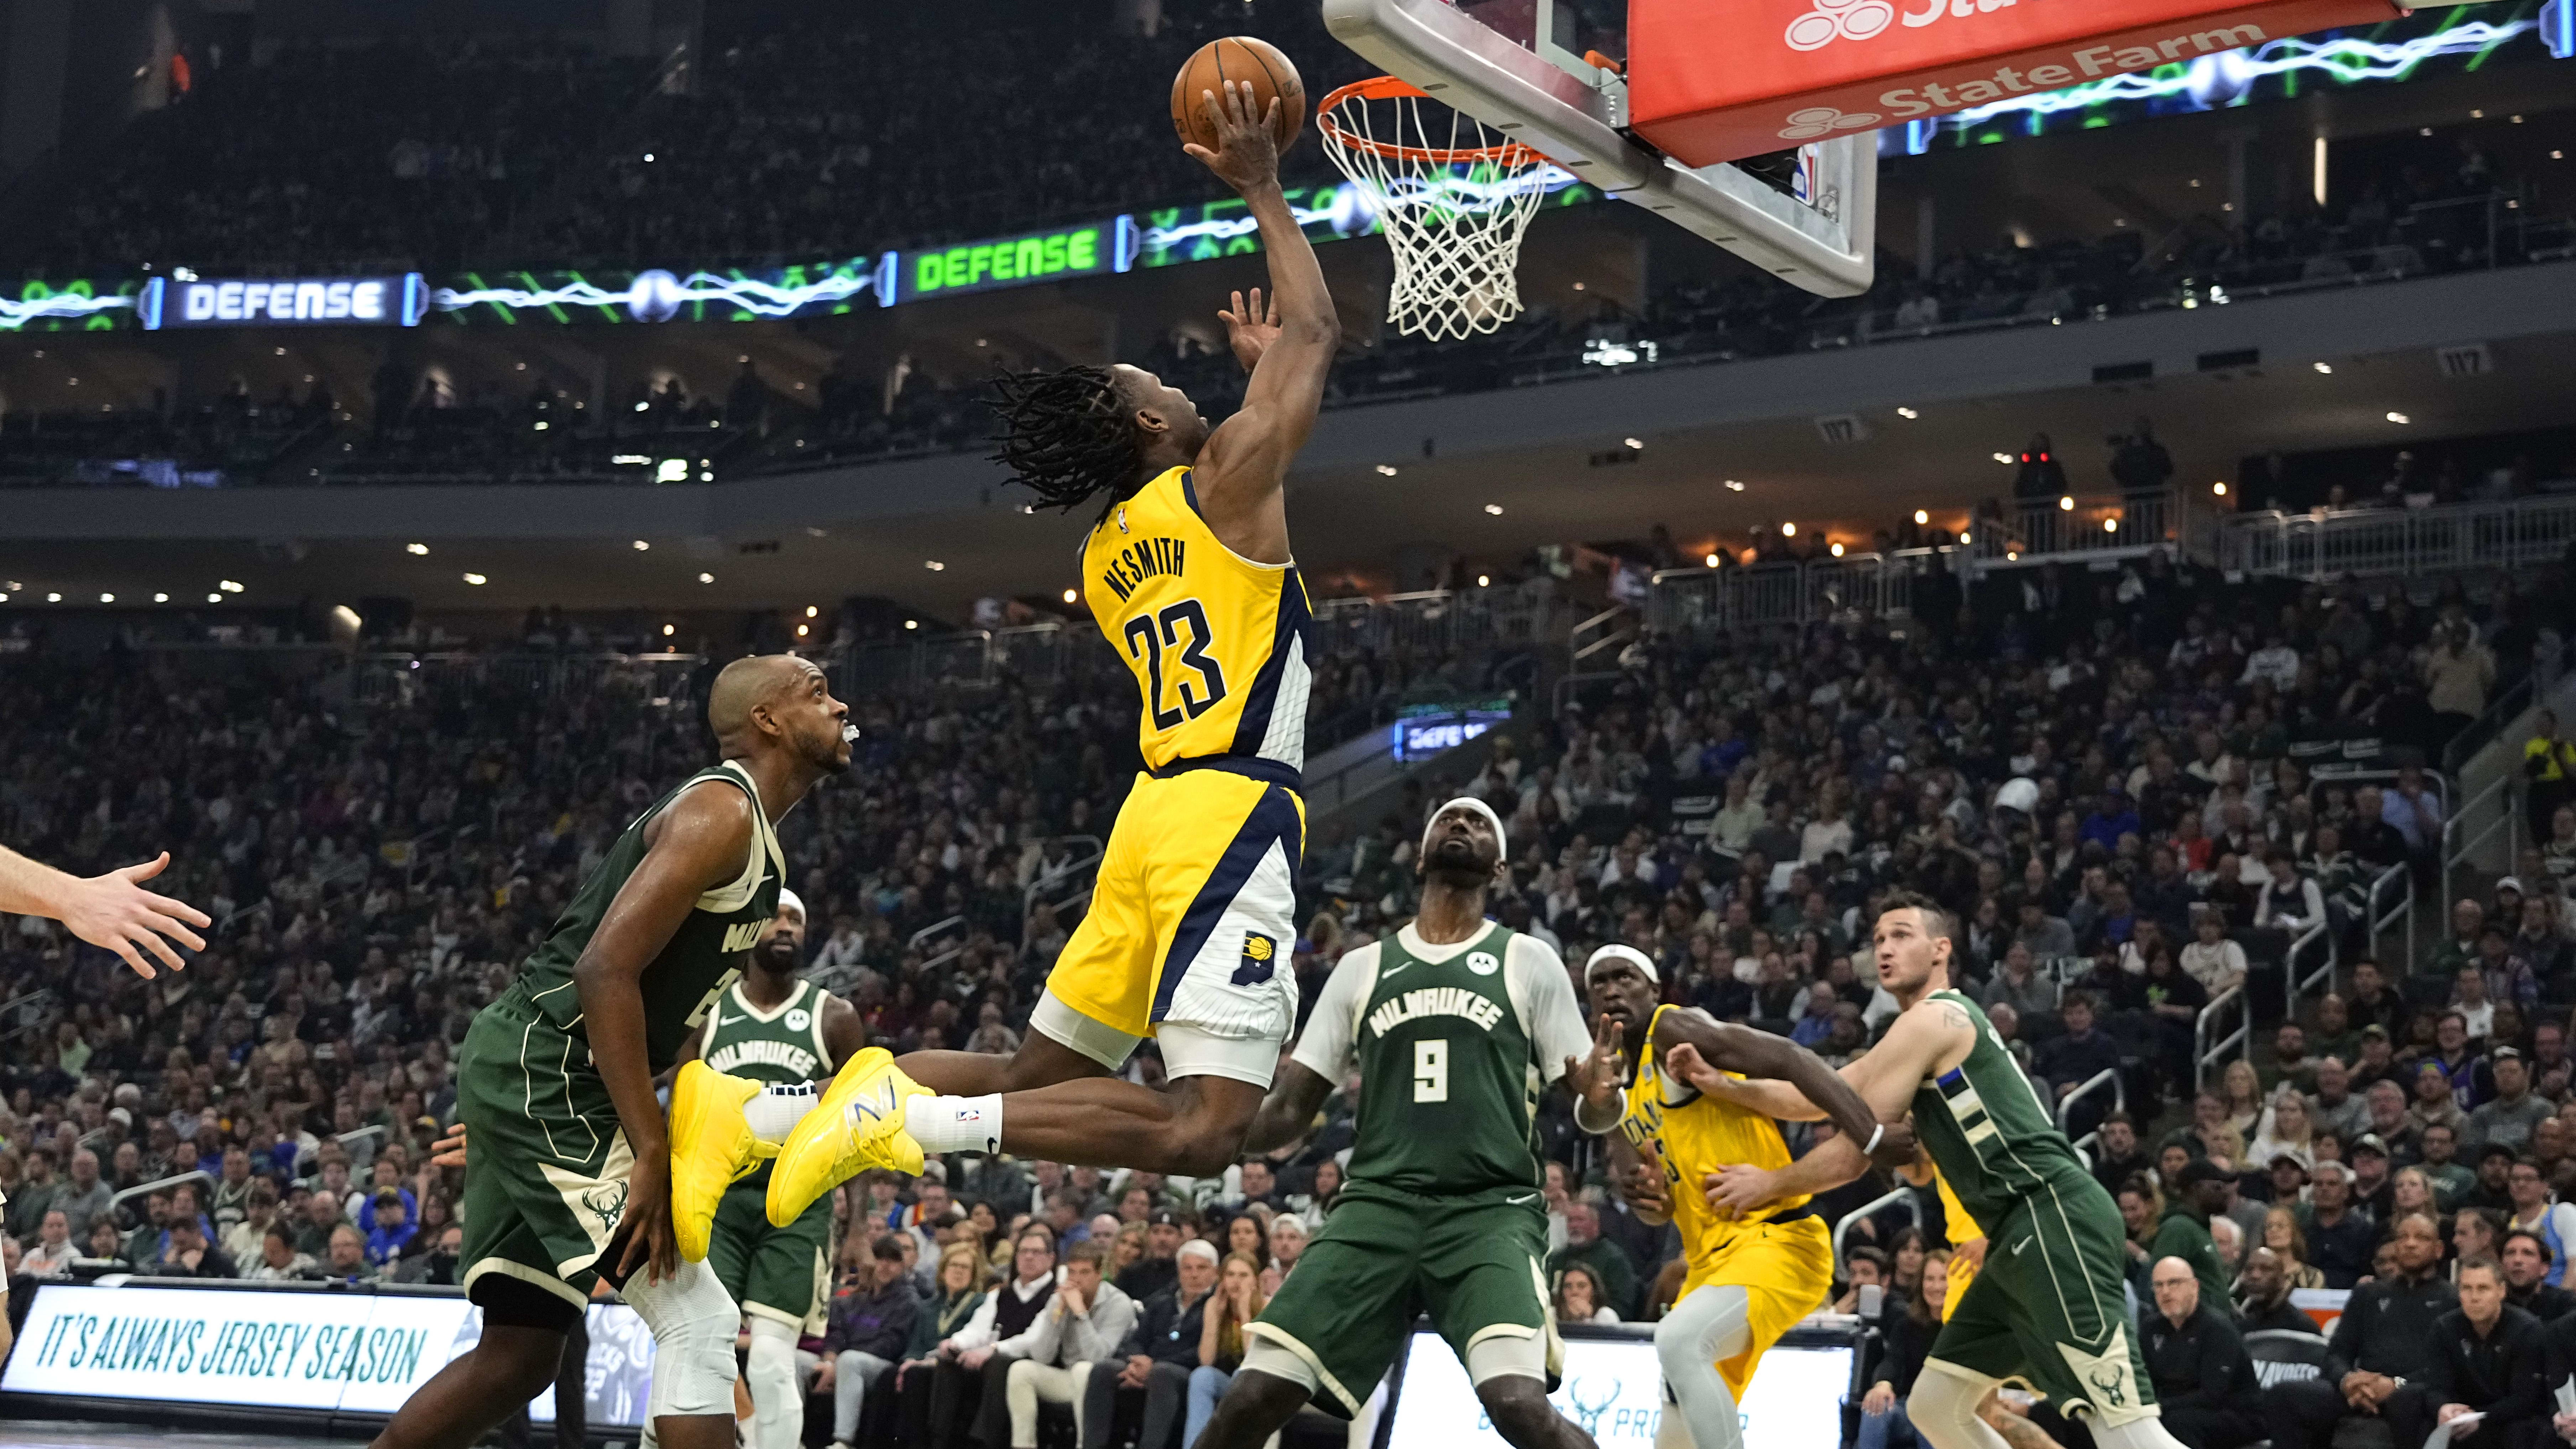 Indiana Pacers offense wasn’t ready for the moment in Game 5 vs Milwaukee Bucks